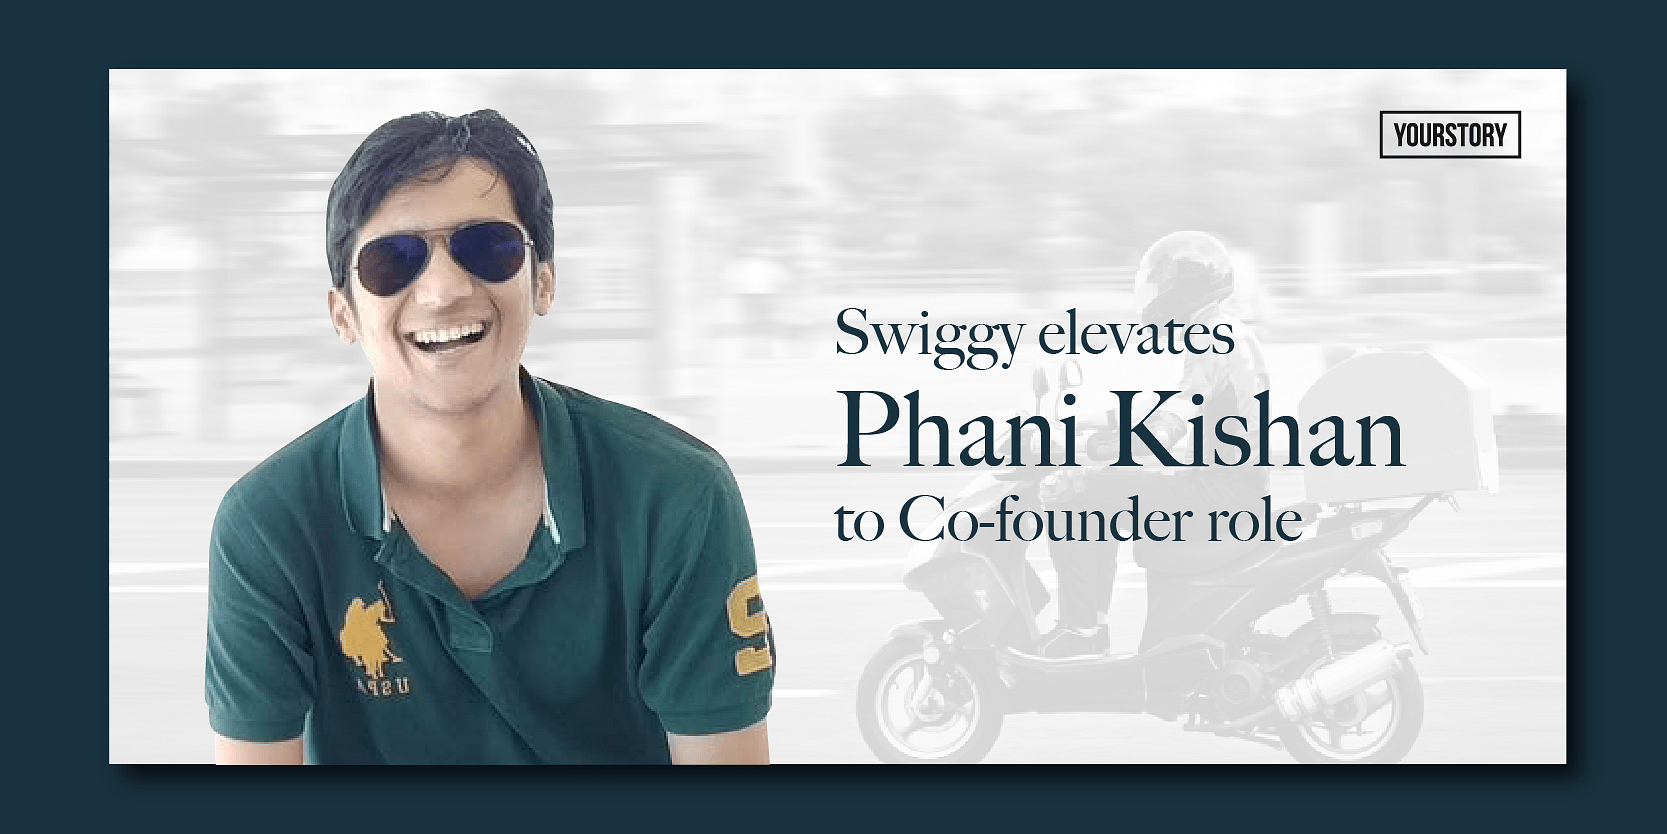 You are currently viewing Swiggy elevates Phani Kishan to co-founder in “ode to a Swiggster” who helped enable the foodtech startup’s journey